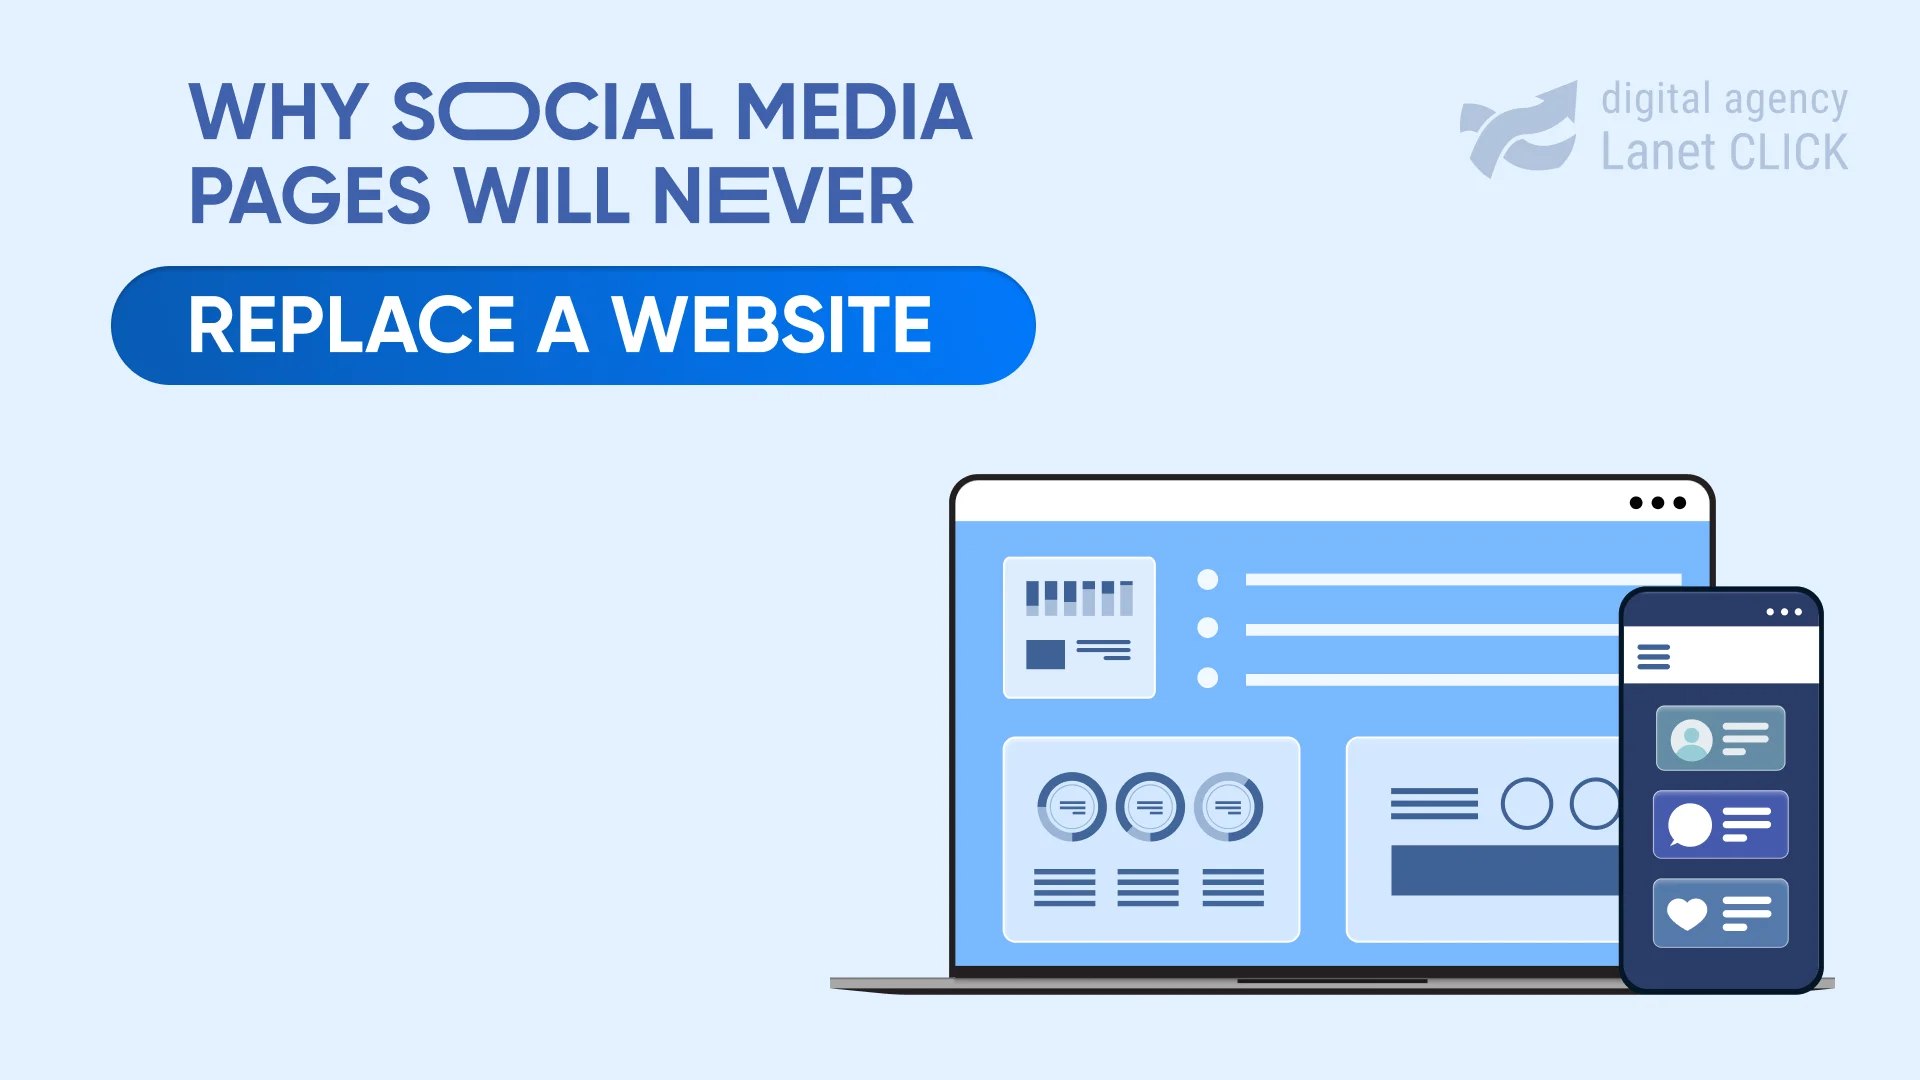 Why social media pages will never replace a website